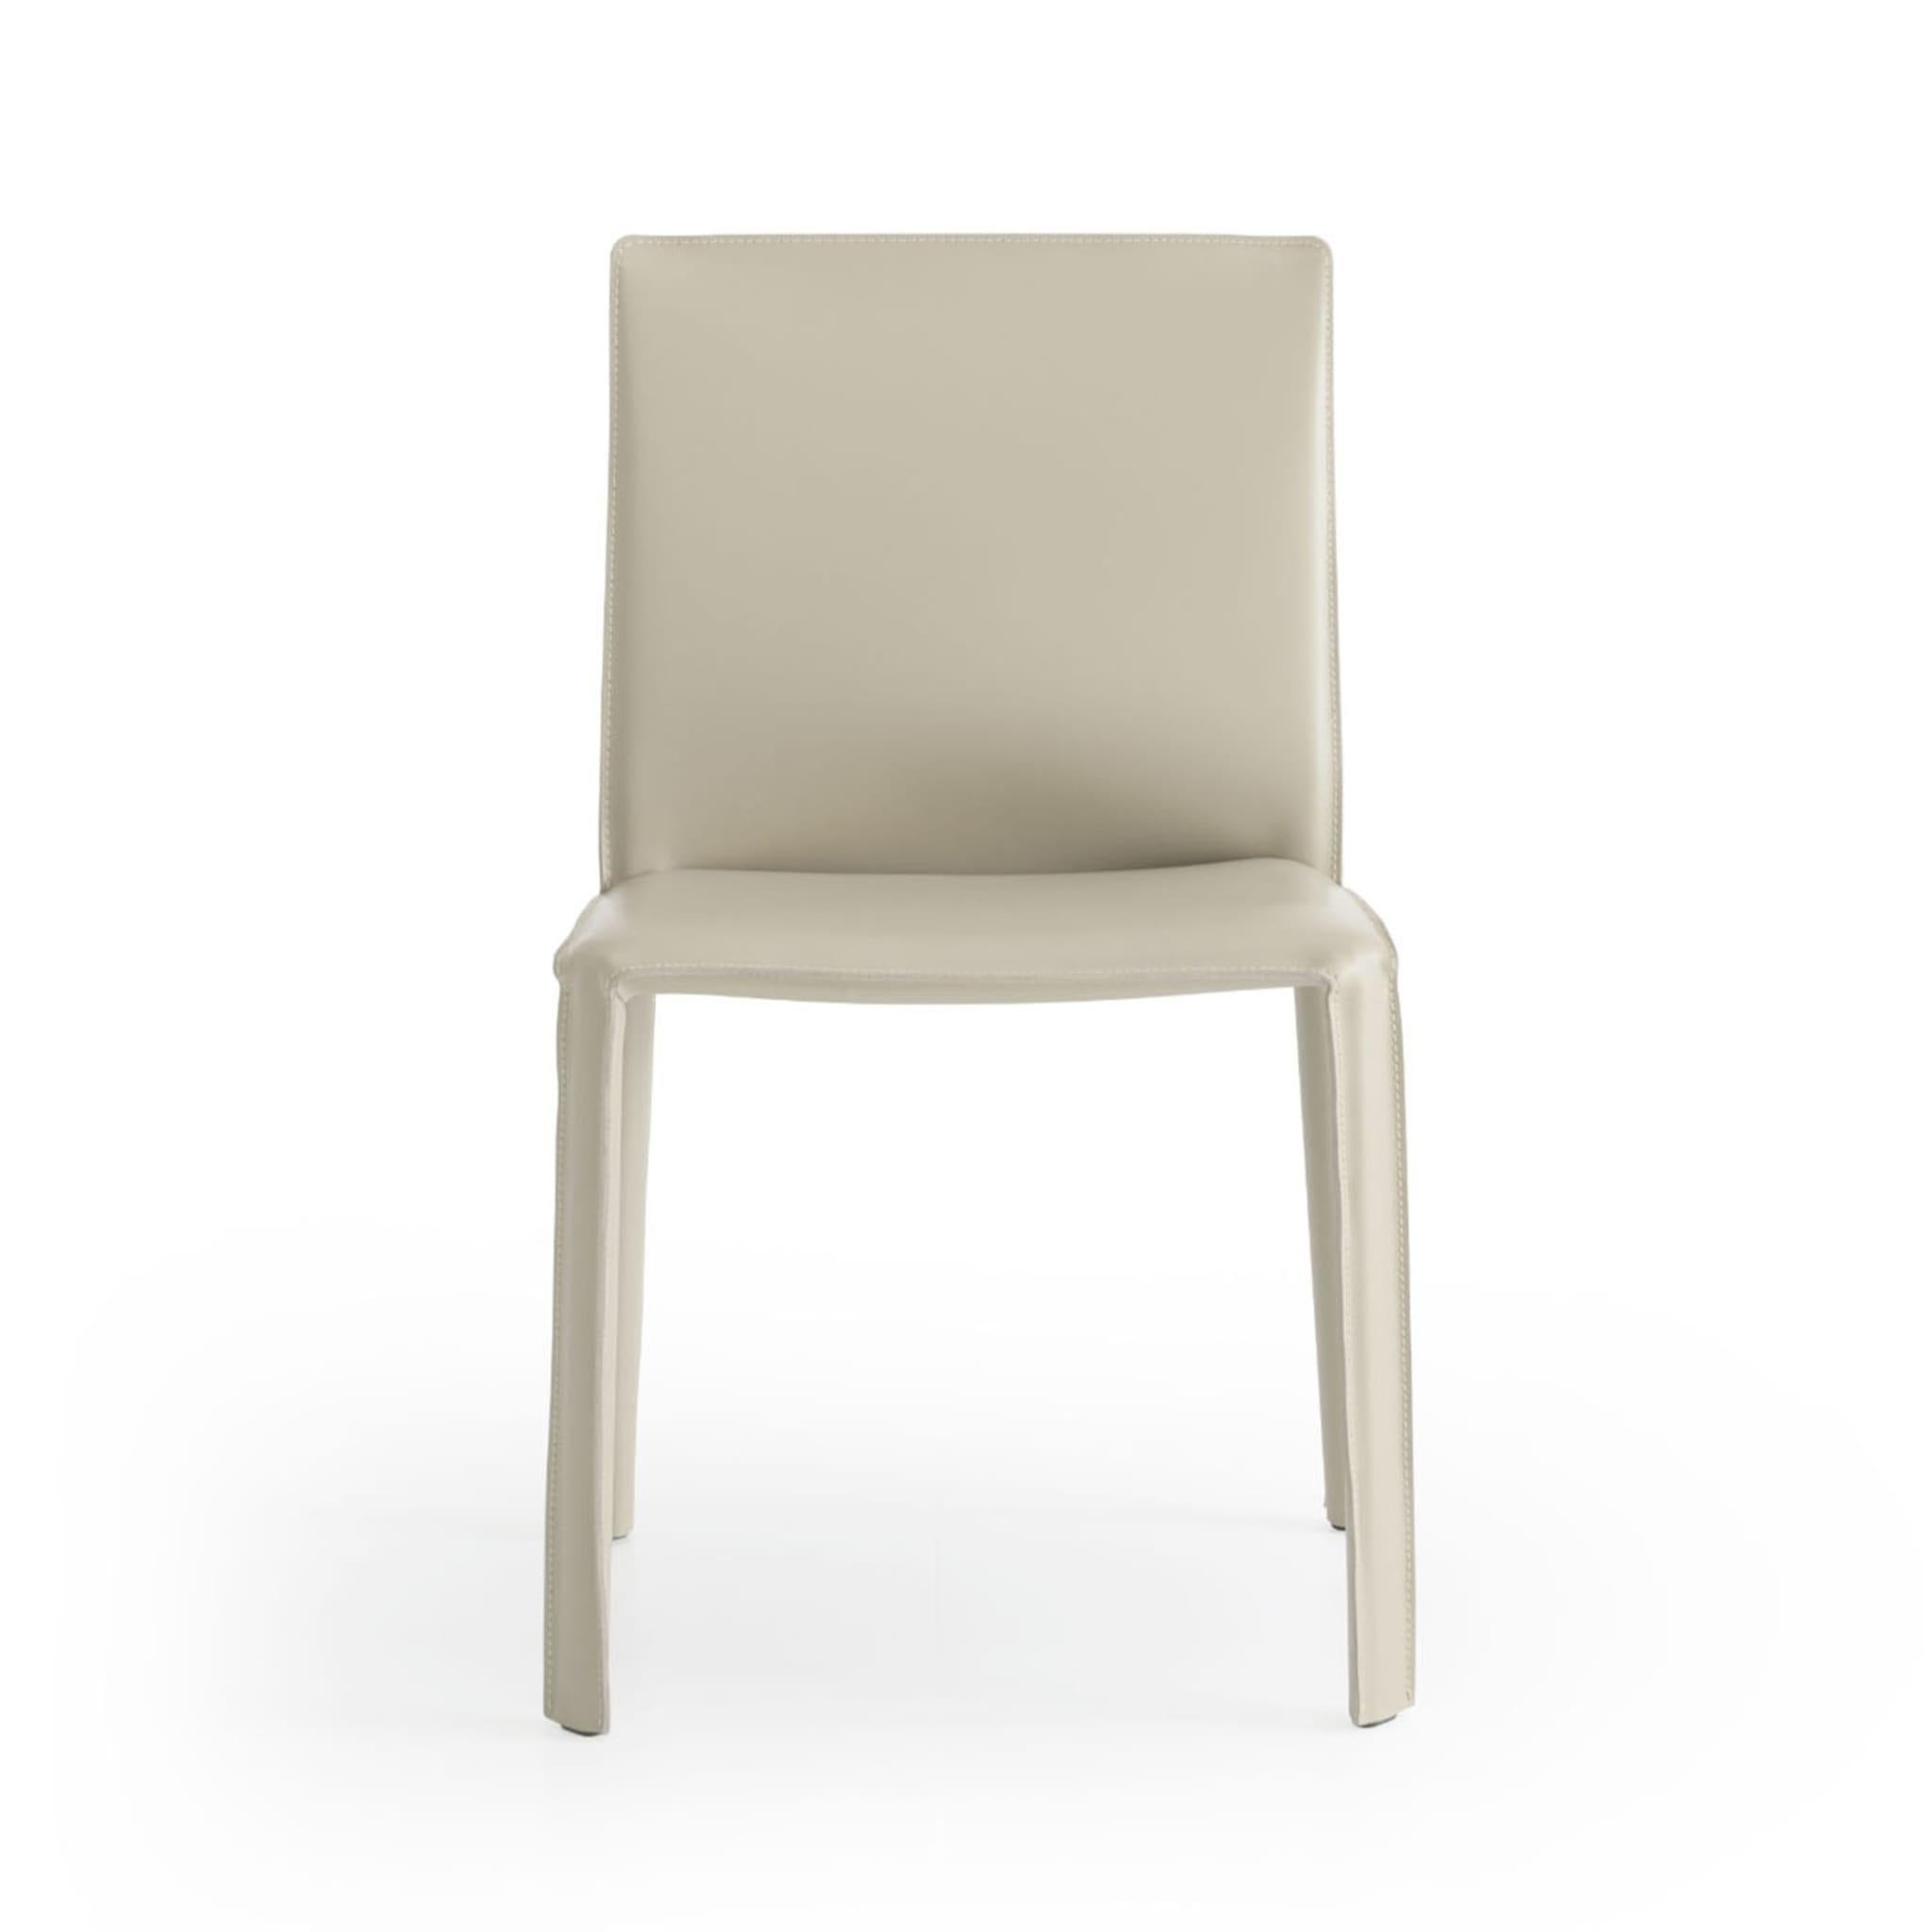 Italian Jumpsuite Beige Leather Chair For Sale